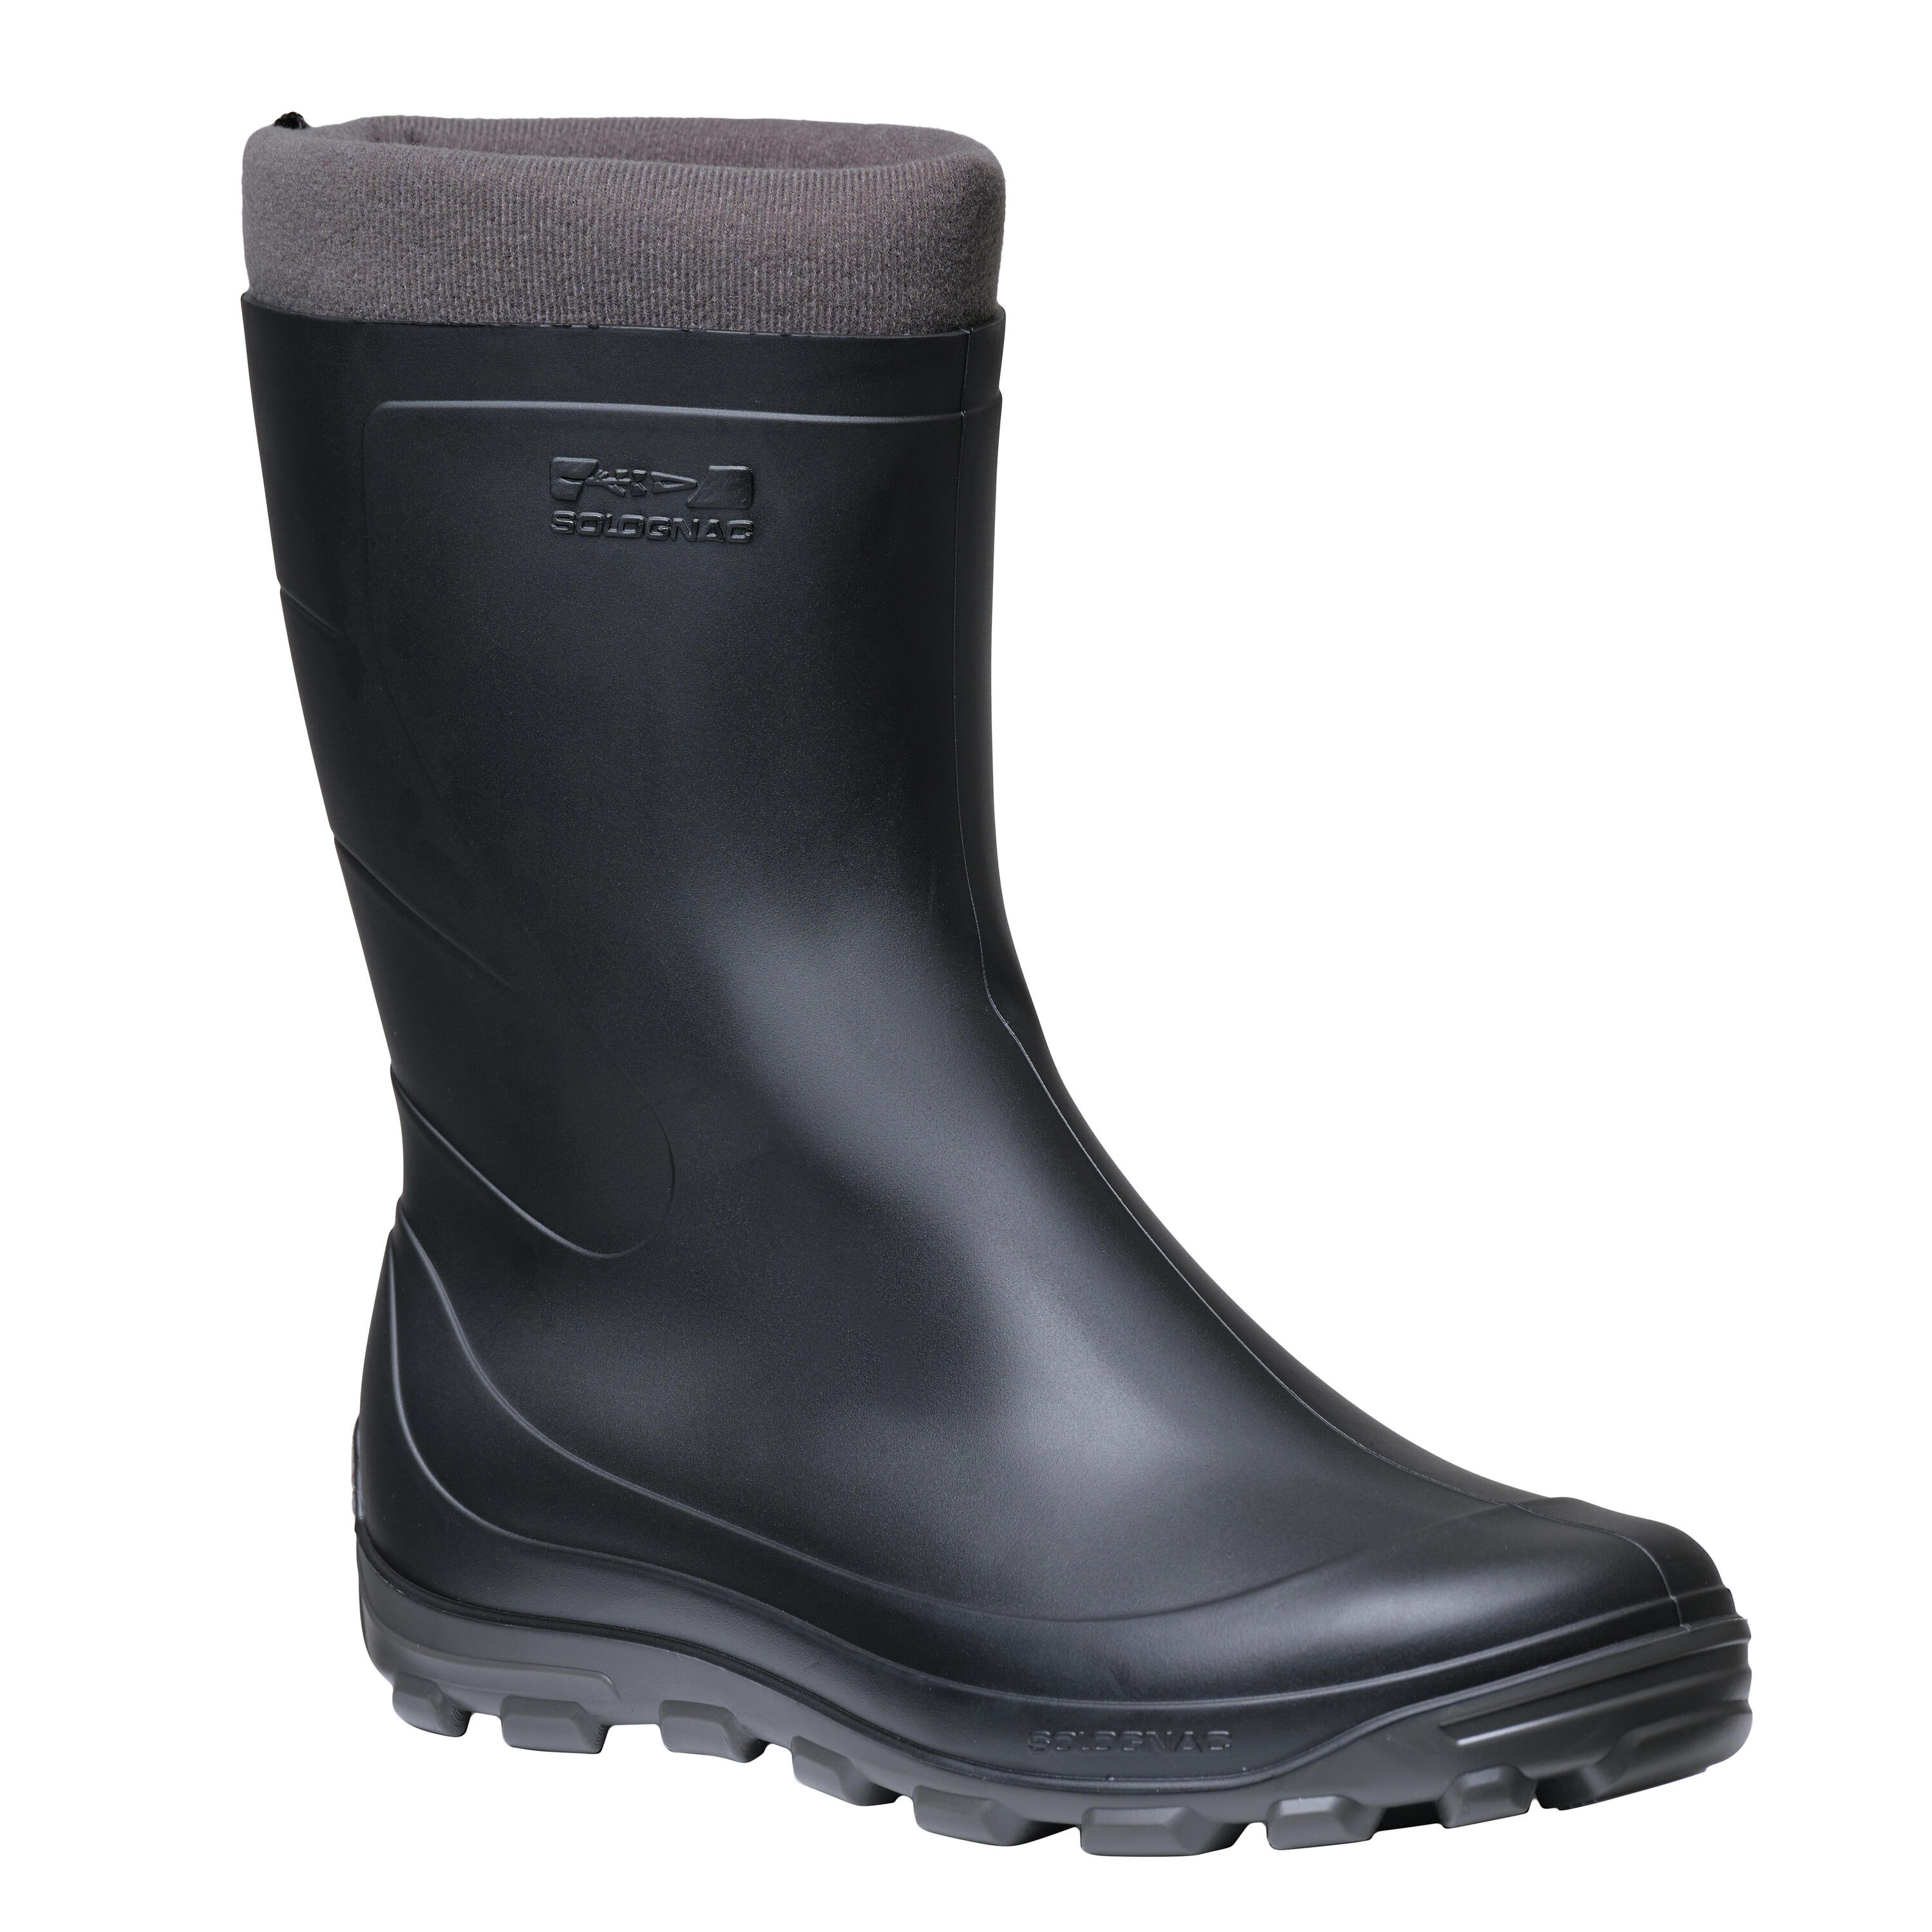 Wellies, country shoes and footwear accessories